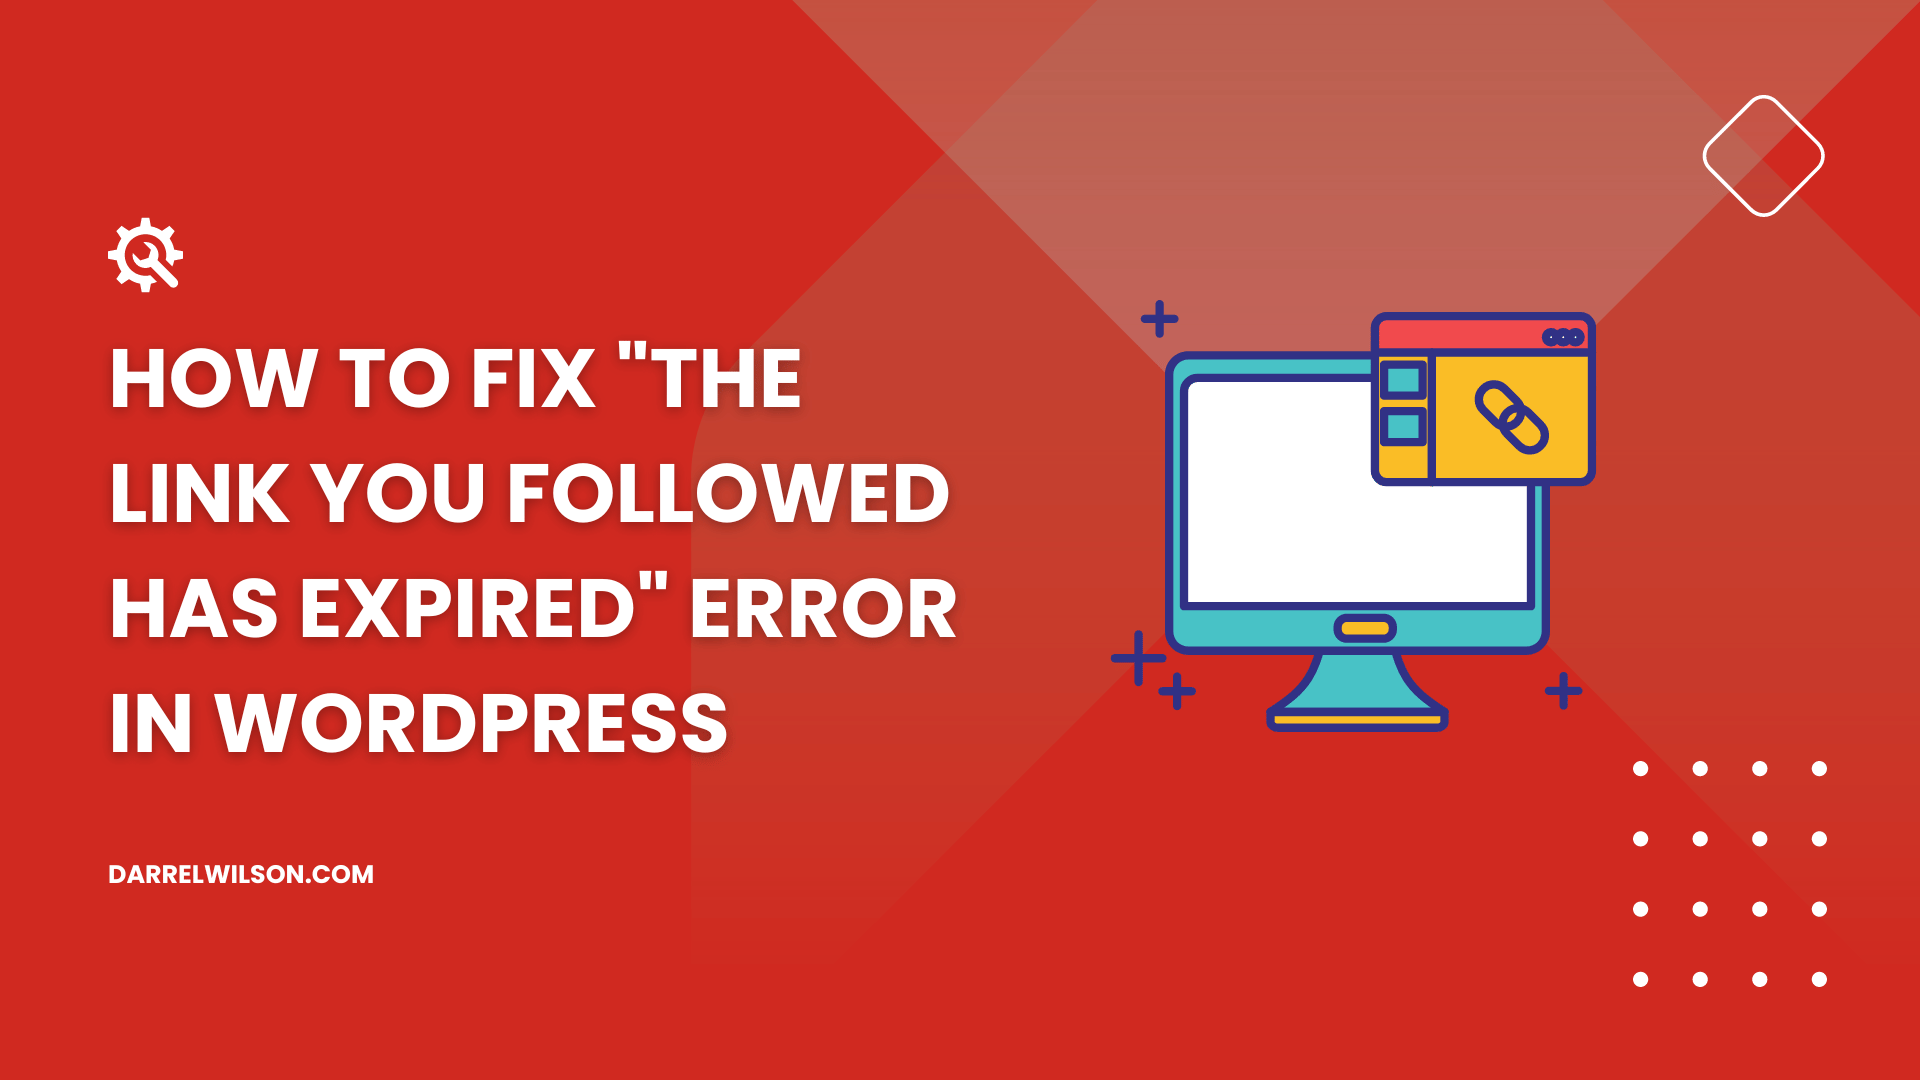 How to Fix “The Link You Followed Has Expired” Error in WordPress